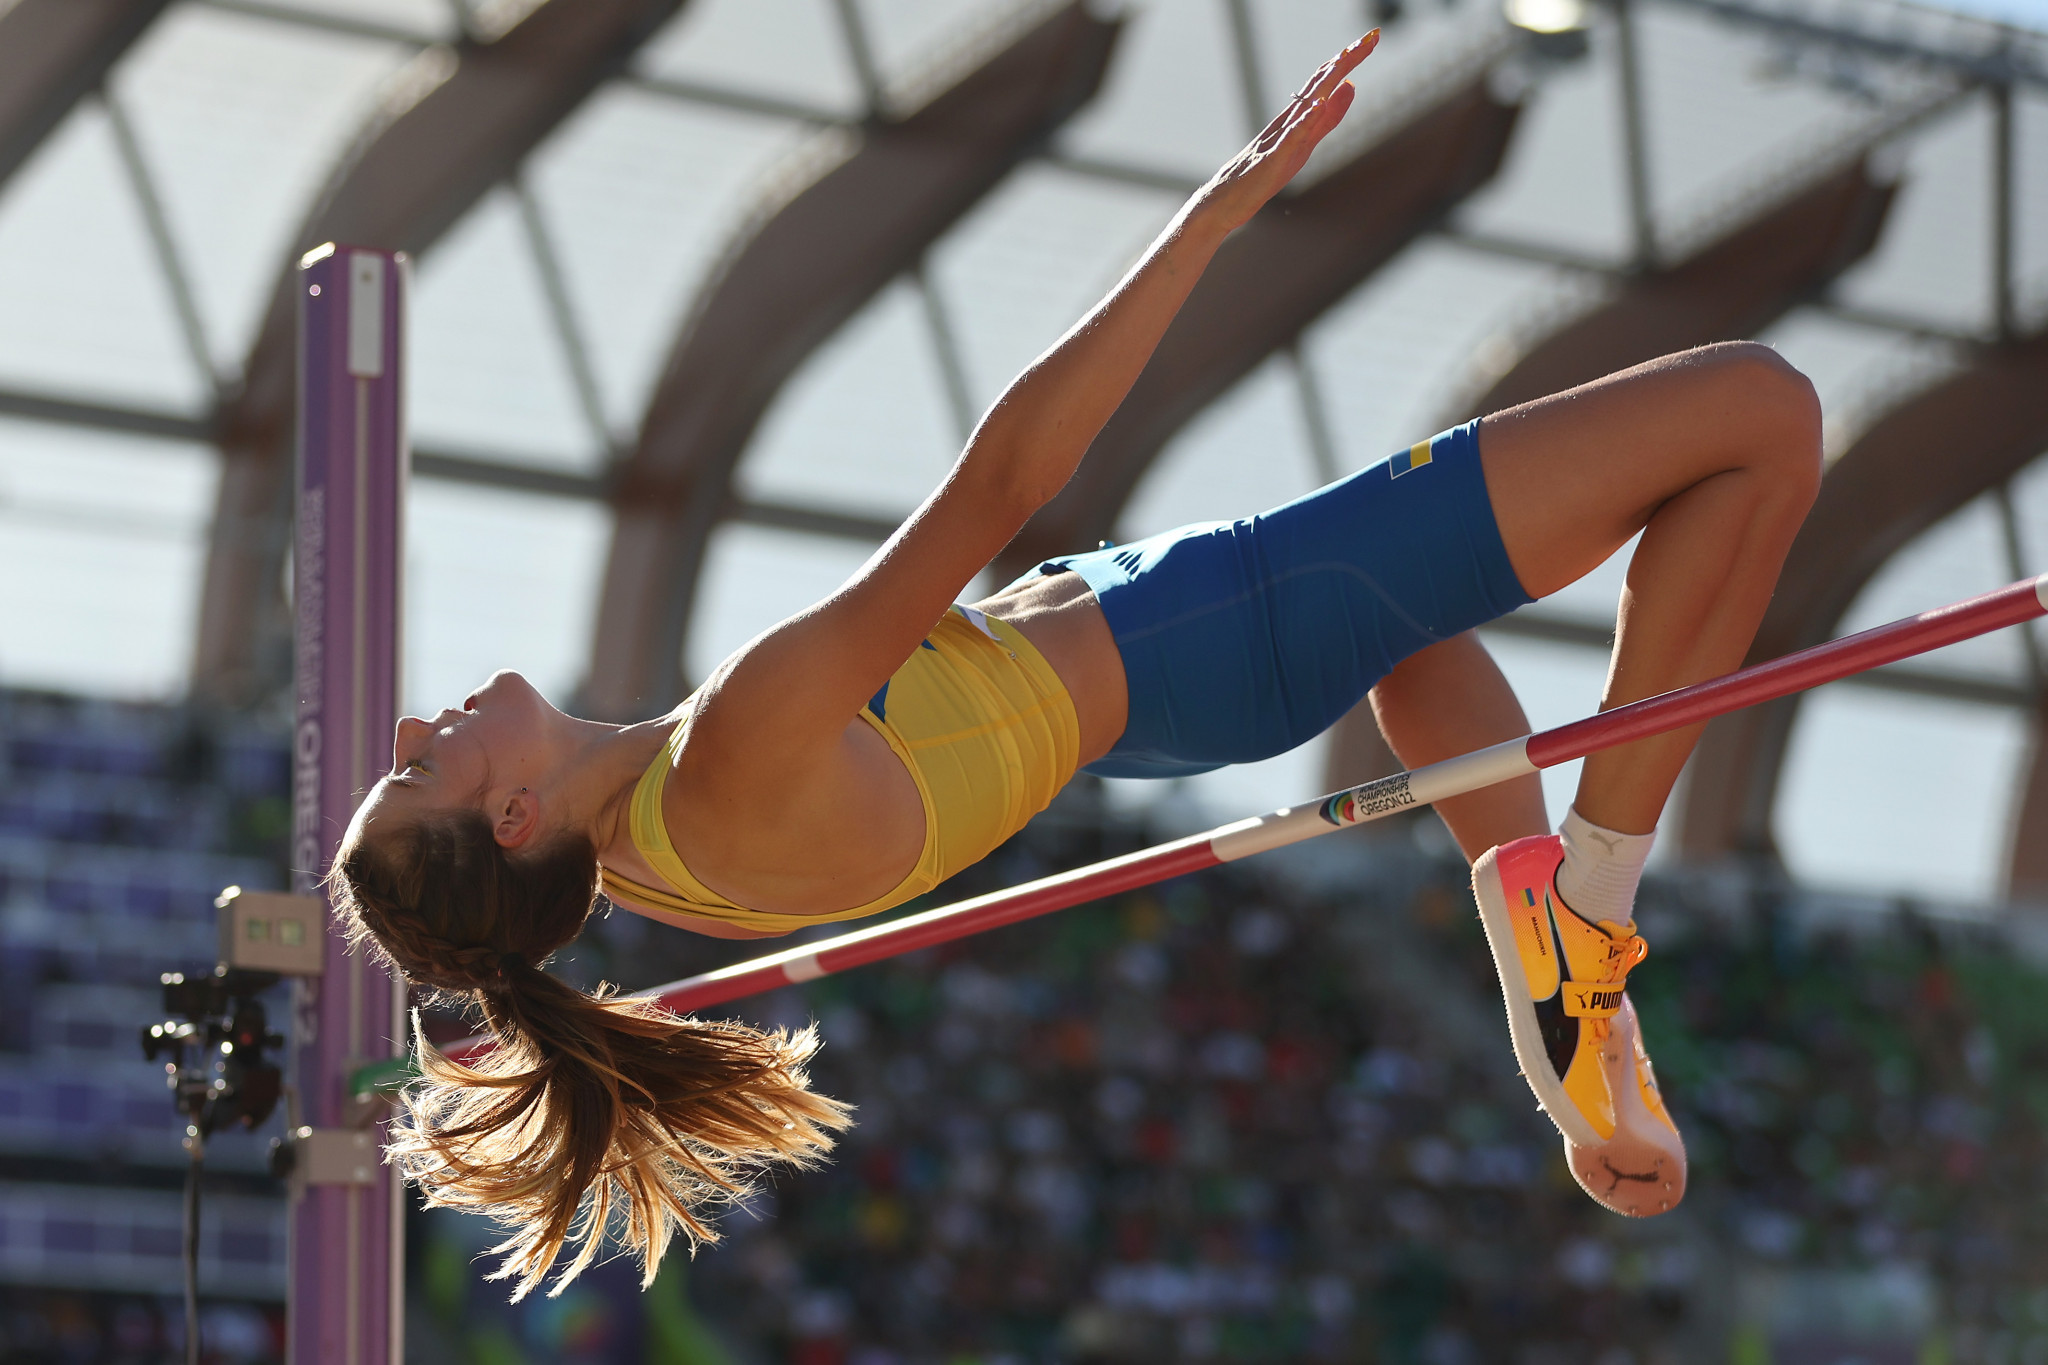 Ukraine won two medals at last year's World Athletics Championships, including silver for Yaroslava Mahuchikh in the women's high jump  ©Getty Images